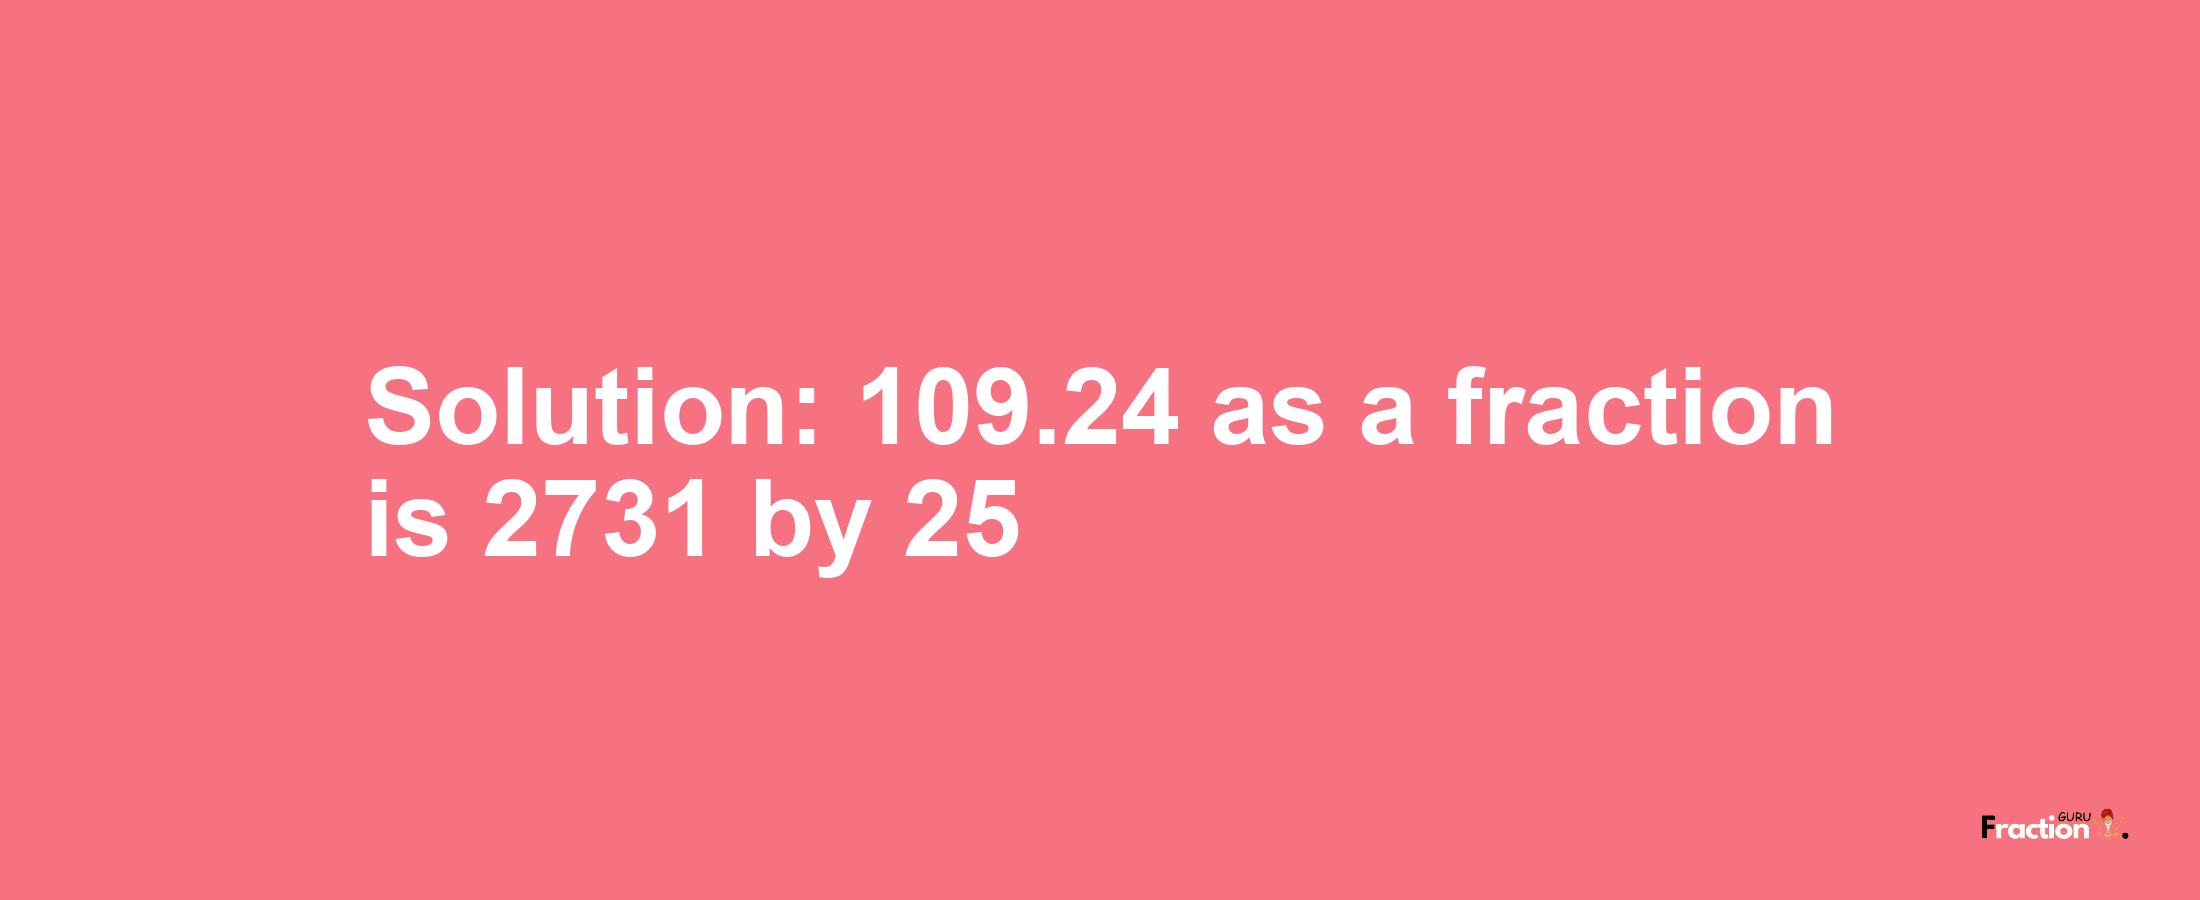 Solution:109.24 as a fraction is 2731/25